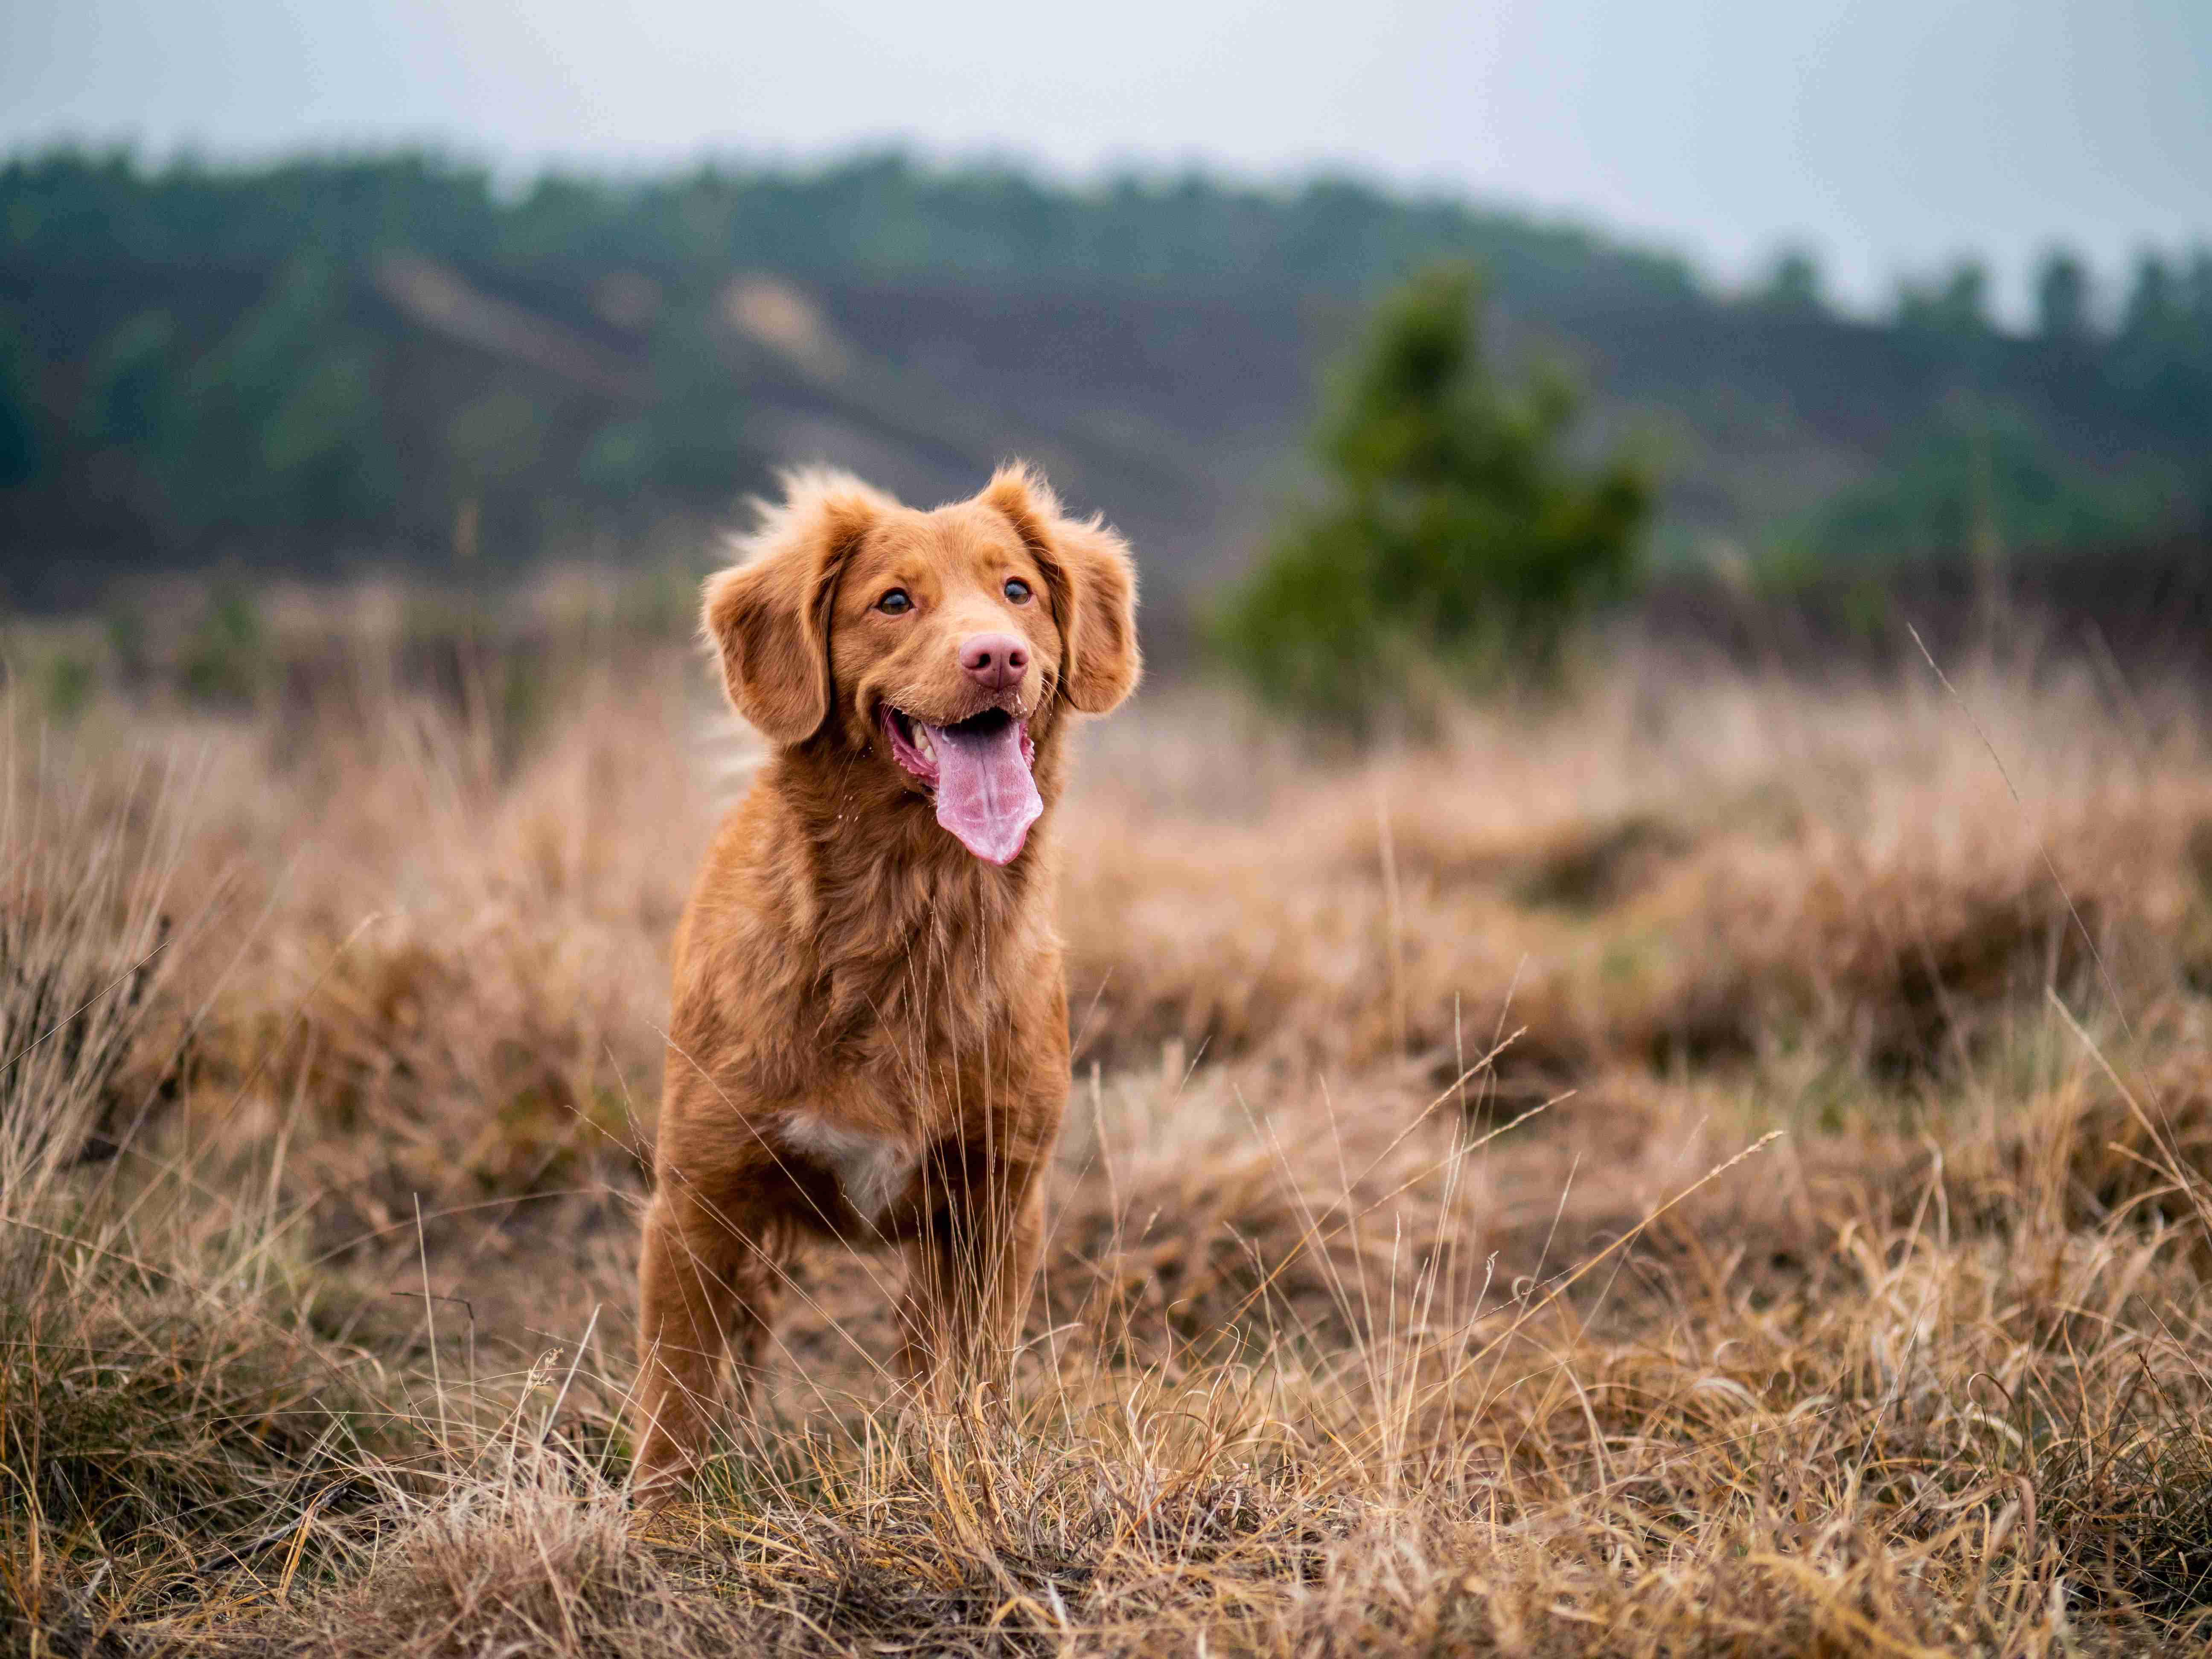 What are some signs of a healthy weight range for a Golden Retriever?